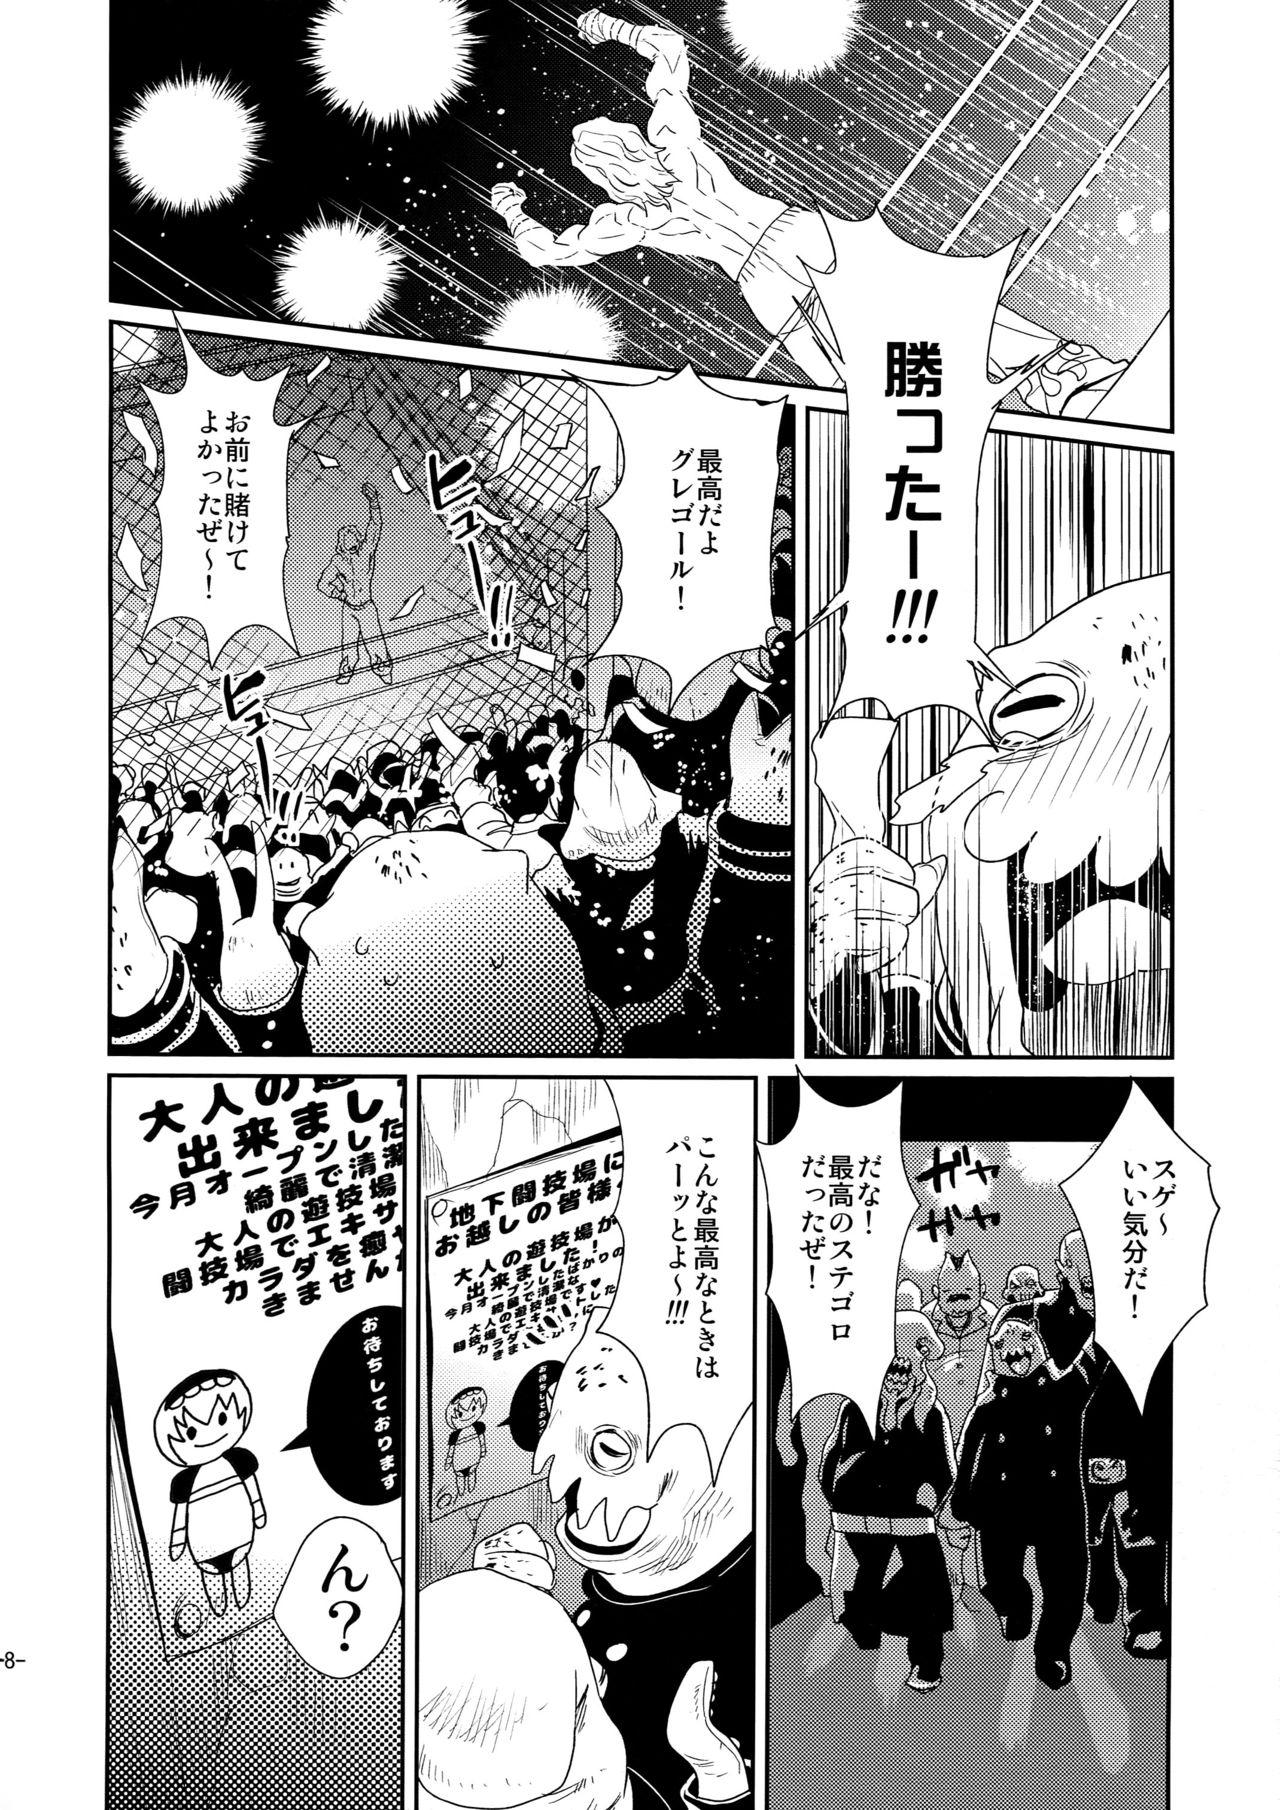 Ethnic CHEAP FICTION - Kekkai sensen Old And Young - Page 10